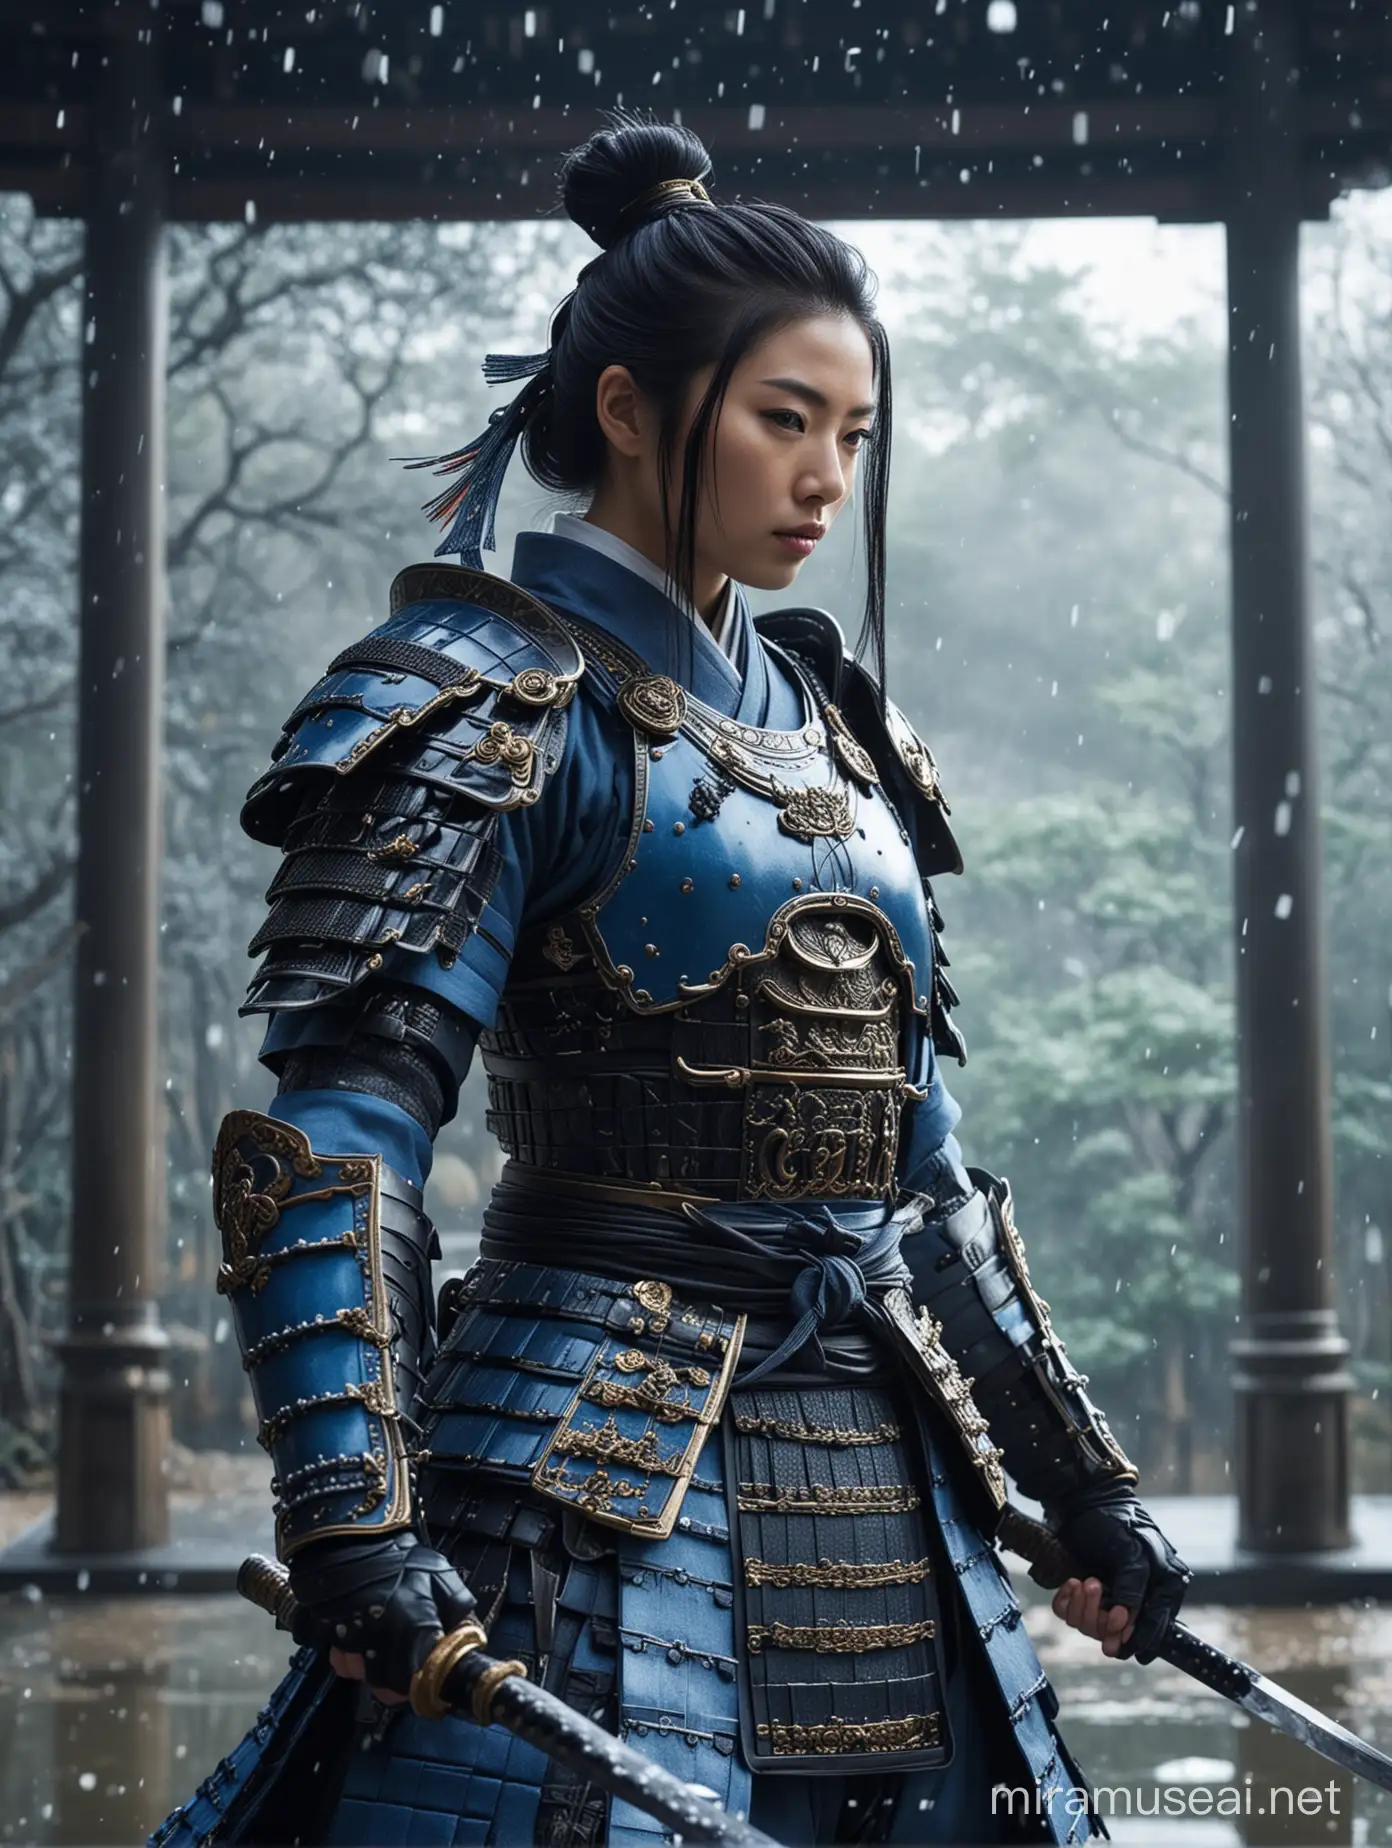 Character: A stunning female samurai warrior in bright light blue armor that shows elegance and strength.
Environment: A peaceful Japanese temple.
Background: A front view of a simple but beautiful Japanese temple.
Style: A rich fashion shoot blending the classic samurai look with a modern twist.
Photography Type: A cinematic fashion shoot that brings out the character of the black-armored samurai.
Theme: A fashion shoot that combines old and new, centered on the blue-armored samurai.
Visual Filters: Enhanced with a Fashion Film Look-Up Table (LUT) for a richer look.
Camera Effects: Soft blur, haze, and natural light to bring out the blue of the armor.
Time: Set in a quiet Morning with light snowfall for a peaceful atmosphere.
Resolution: High resolution to capture every detail.
Key Element: The main focus is the bright light black armor, detailed to catch the light and stand out against the temple.
Details: The armor is detailed with traditional Japanese designs and scenes from samurai stories. It shines in the Sun light, showing off the skill of the people who made it. The shape of the armor is highlighted, creating a beautiful image that brings out the spirit of the samurai.